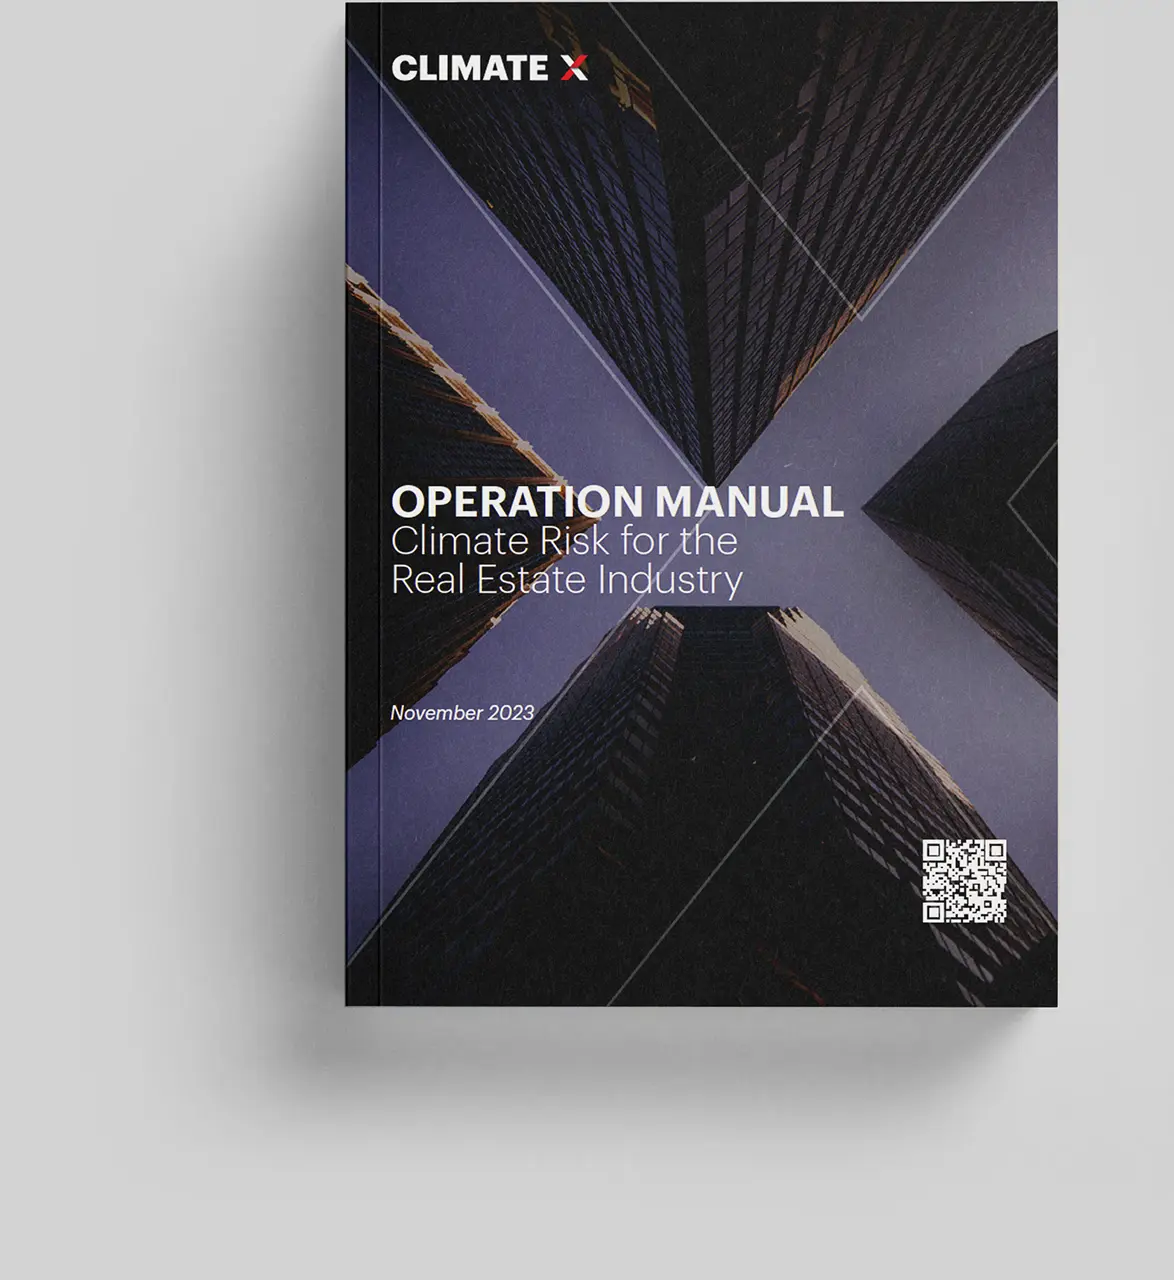 Operations Manual: Climate Risk for the Real Estate Industry